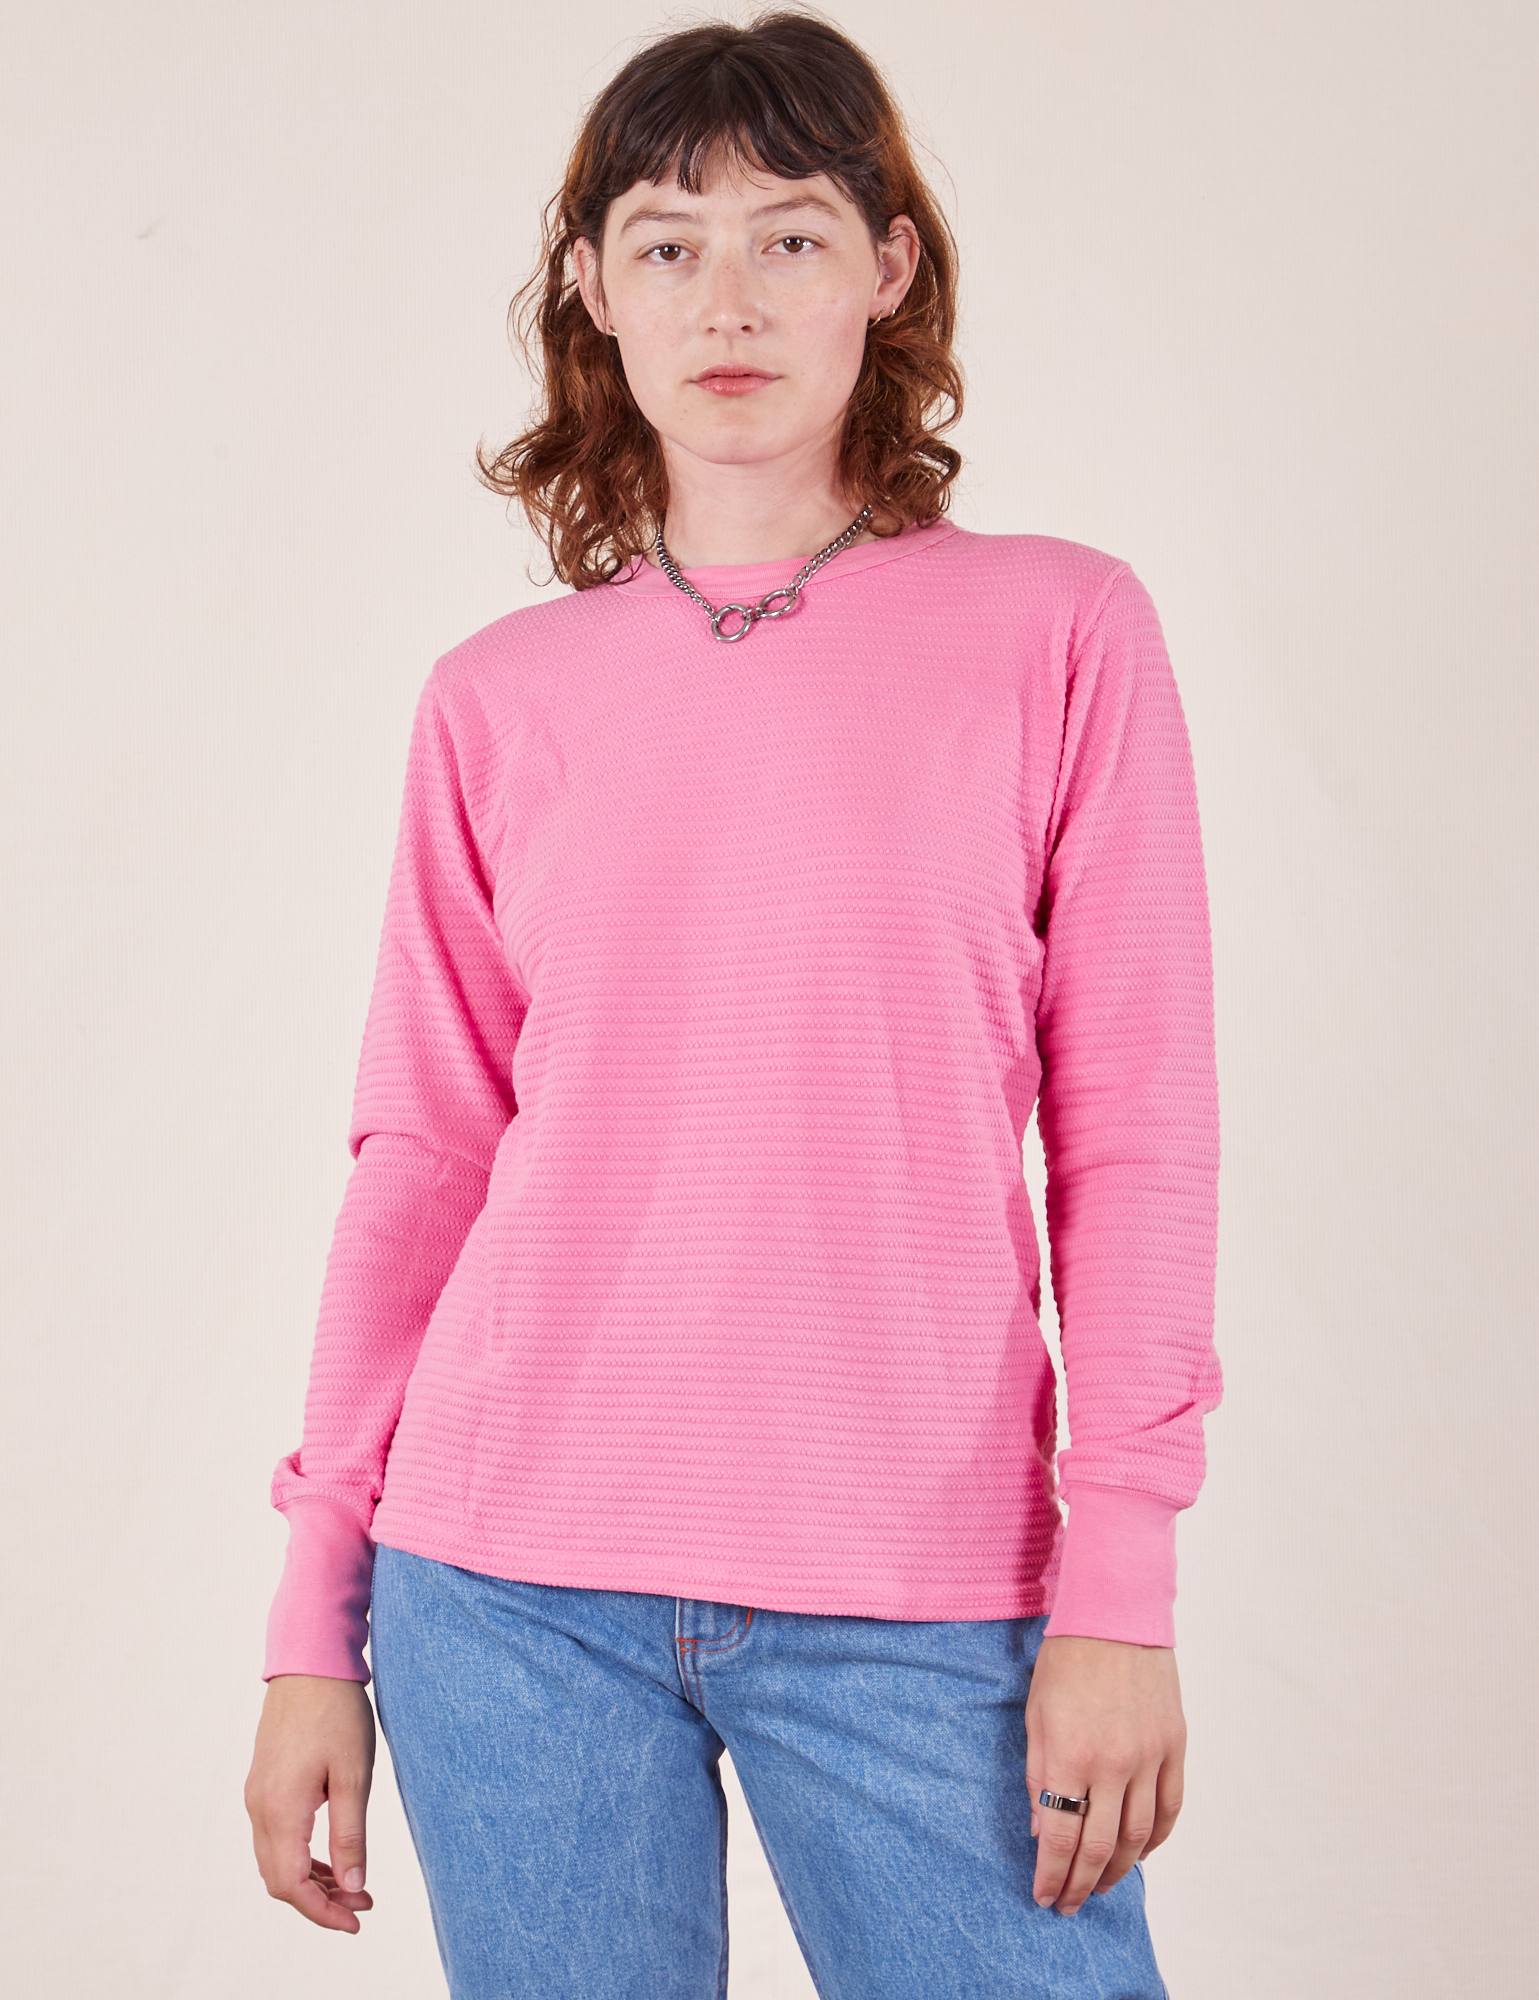 Alex is wearing P Honeycomb Thermal in Bubblegum Pink